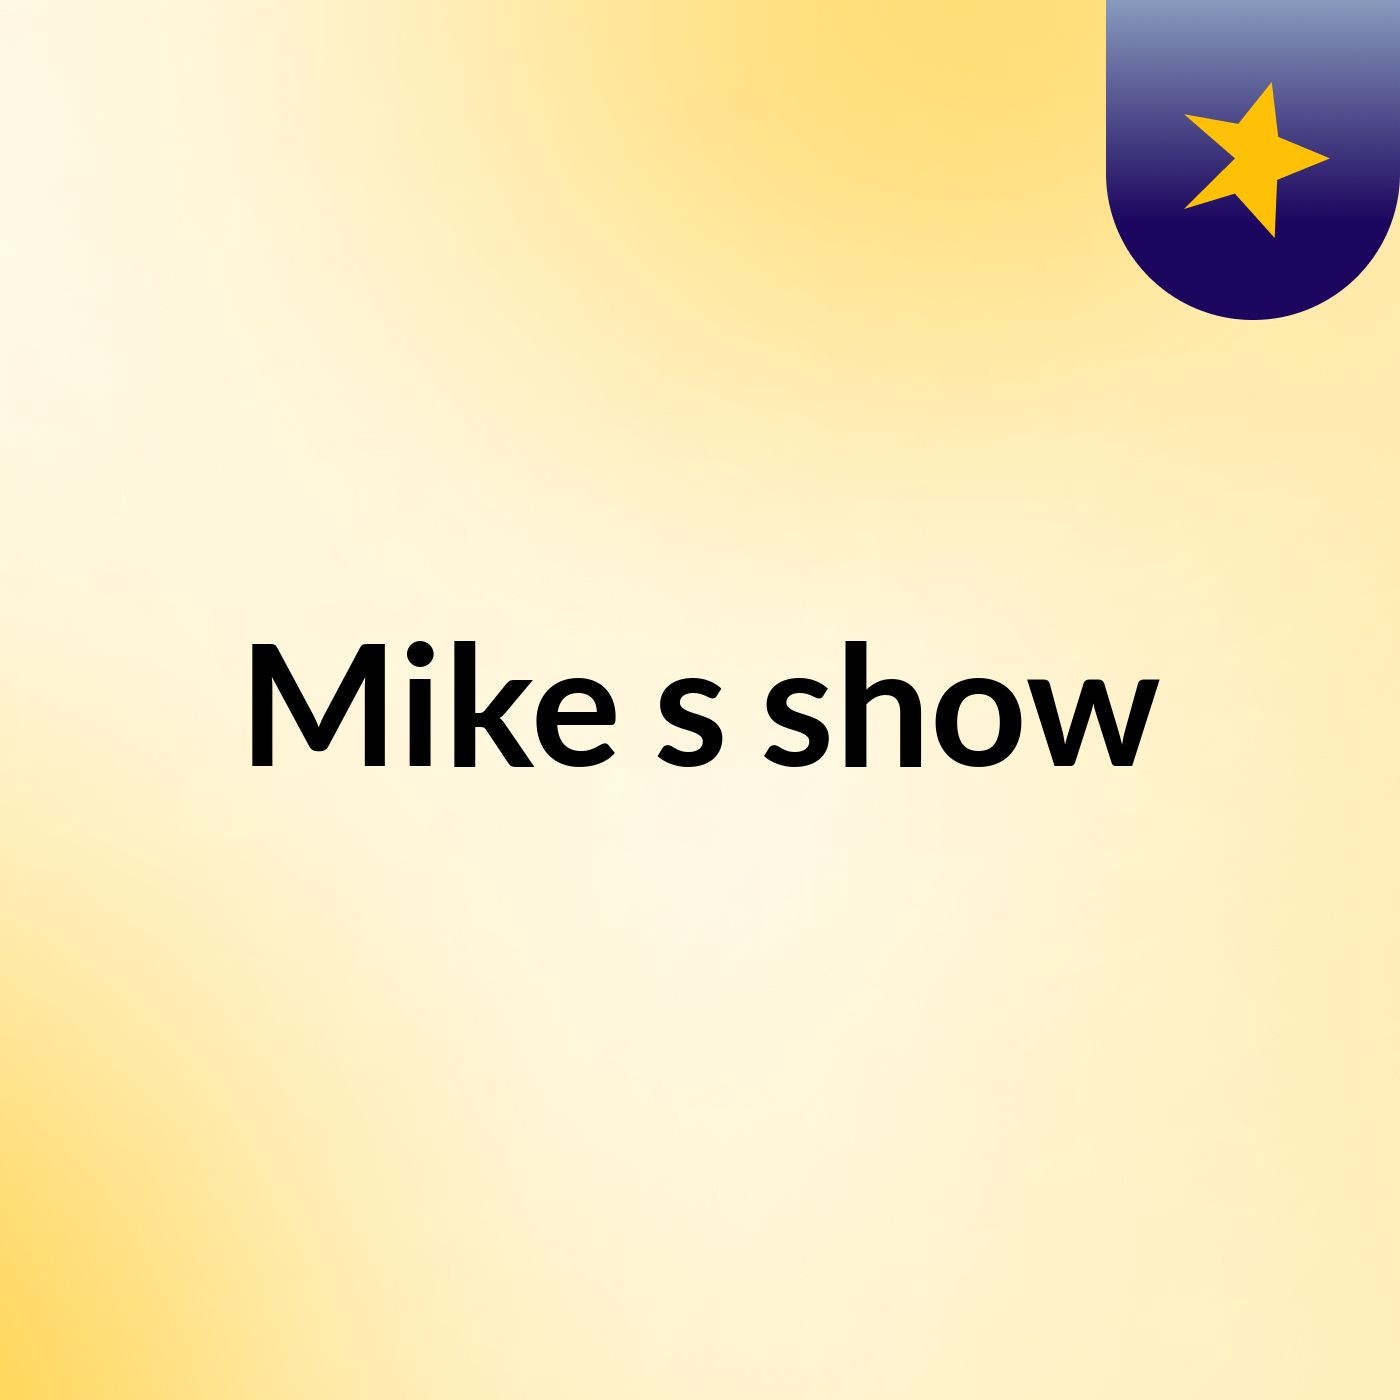 Mike's show